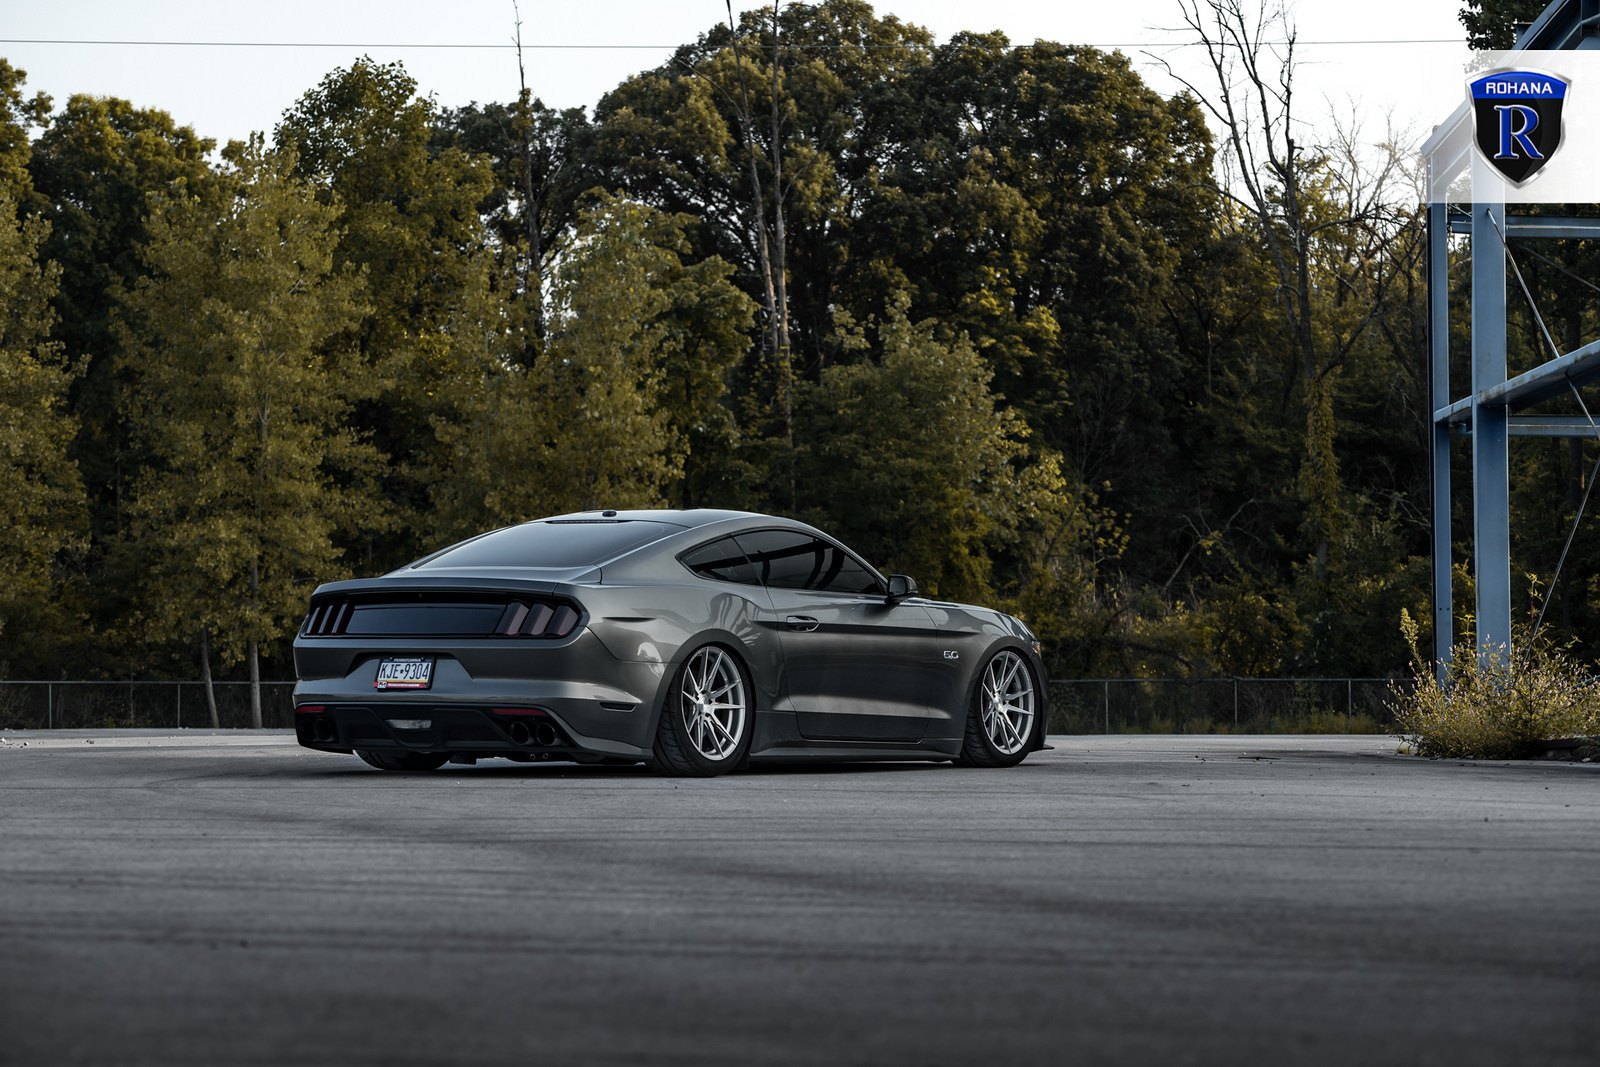 Gray Ford Mustang 5.0 with Custom Rear Diffuser - Photo by Rohana Wheels